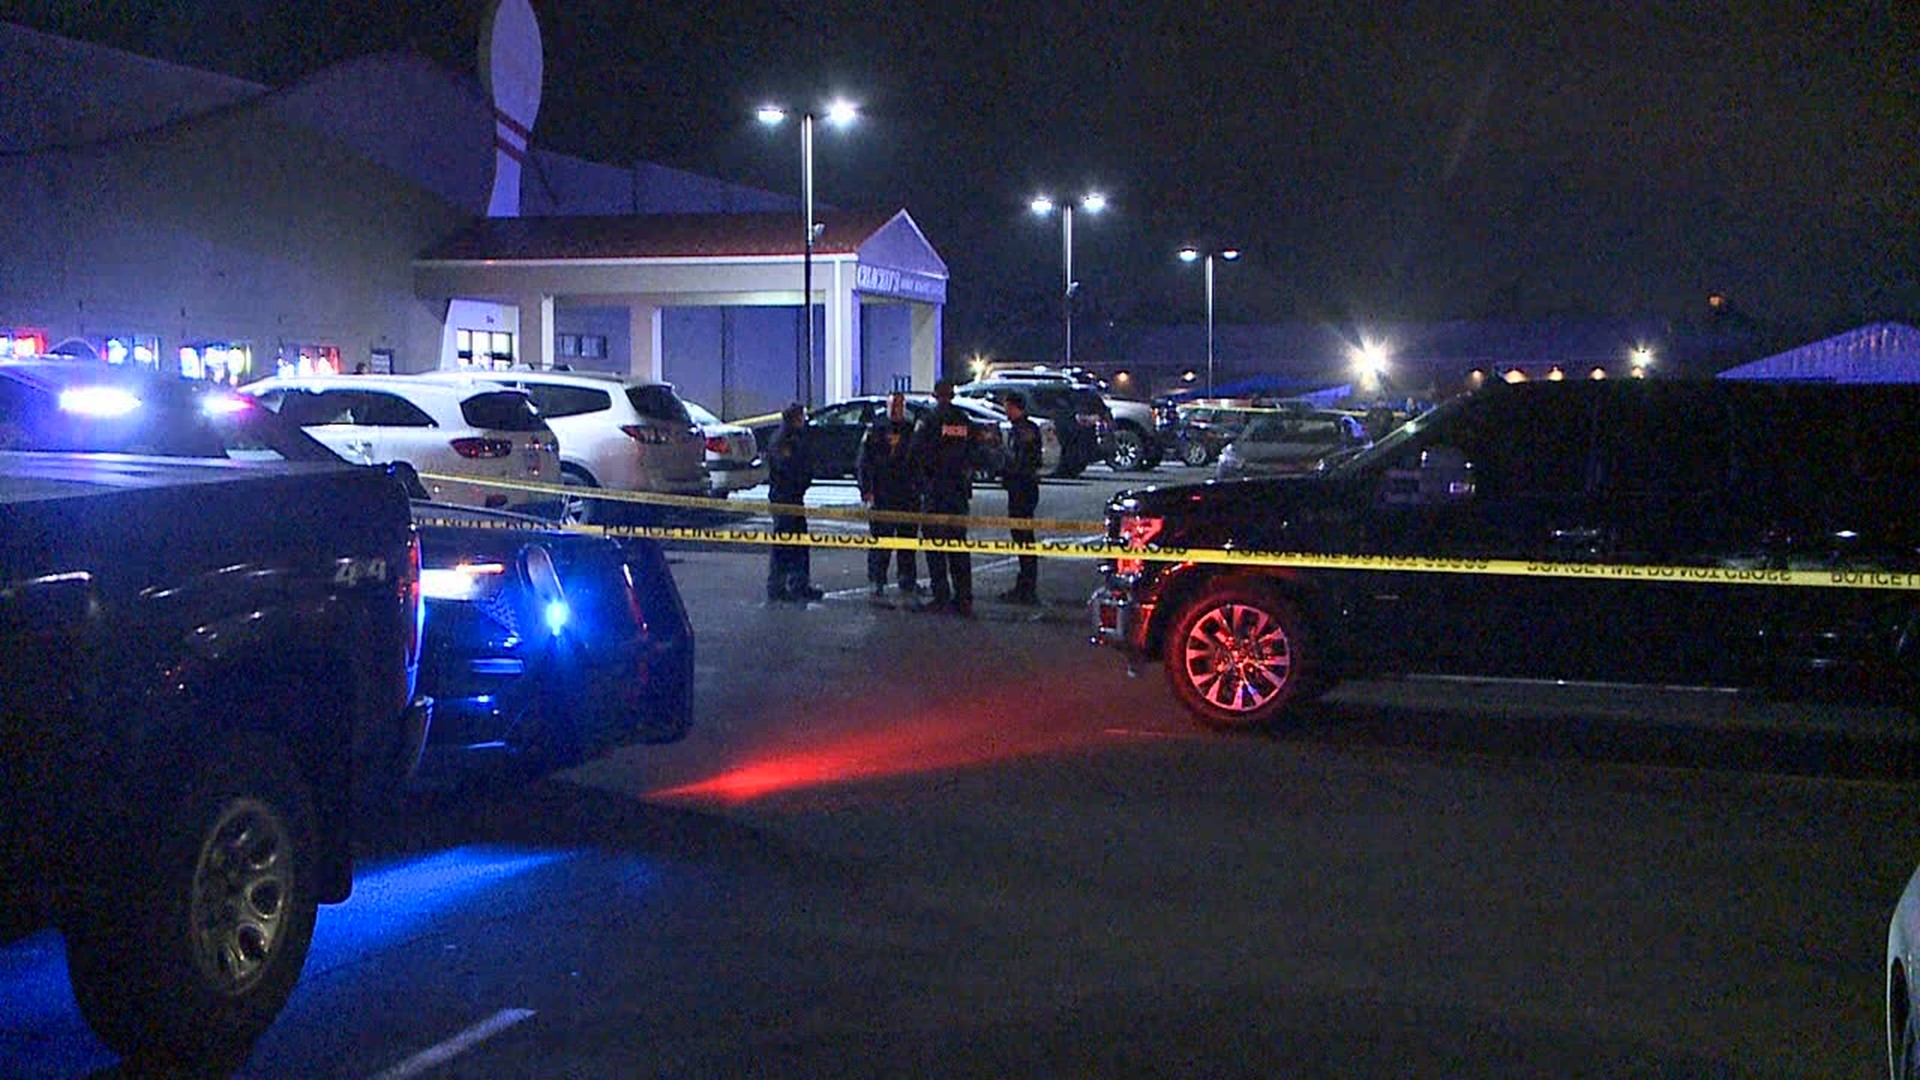 Shots were fired outside a bowling alley in Wilkes-Barre Wednesday night. One person was hit.